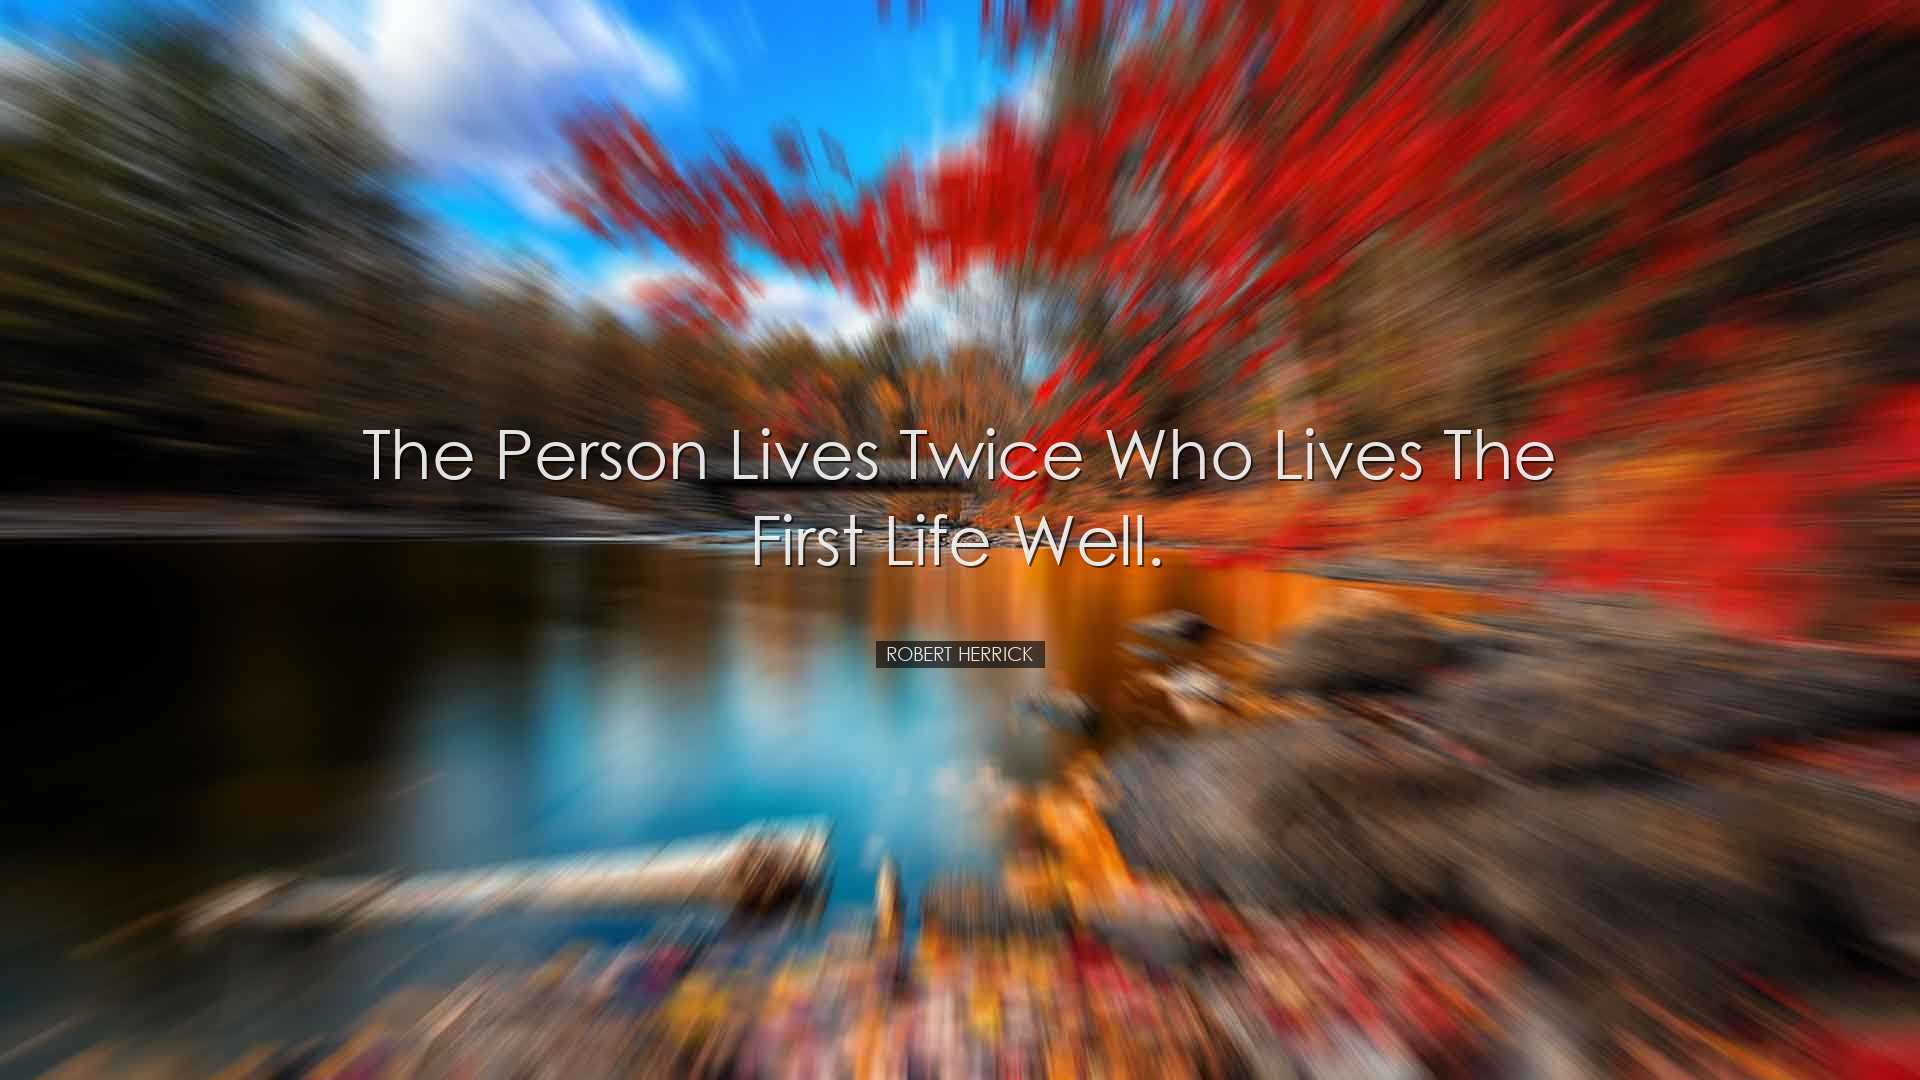 The person lives twice who lives the first life well. - Robert Her